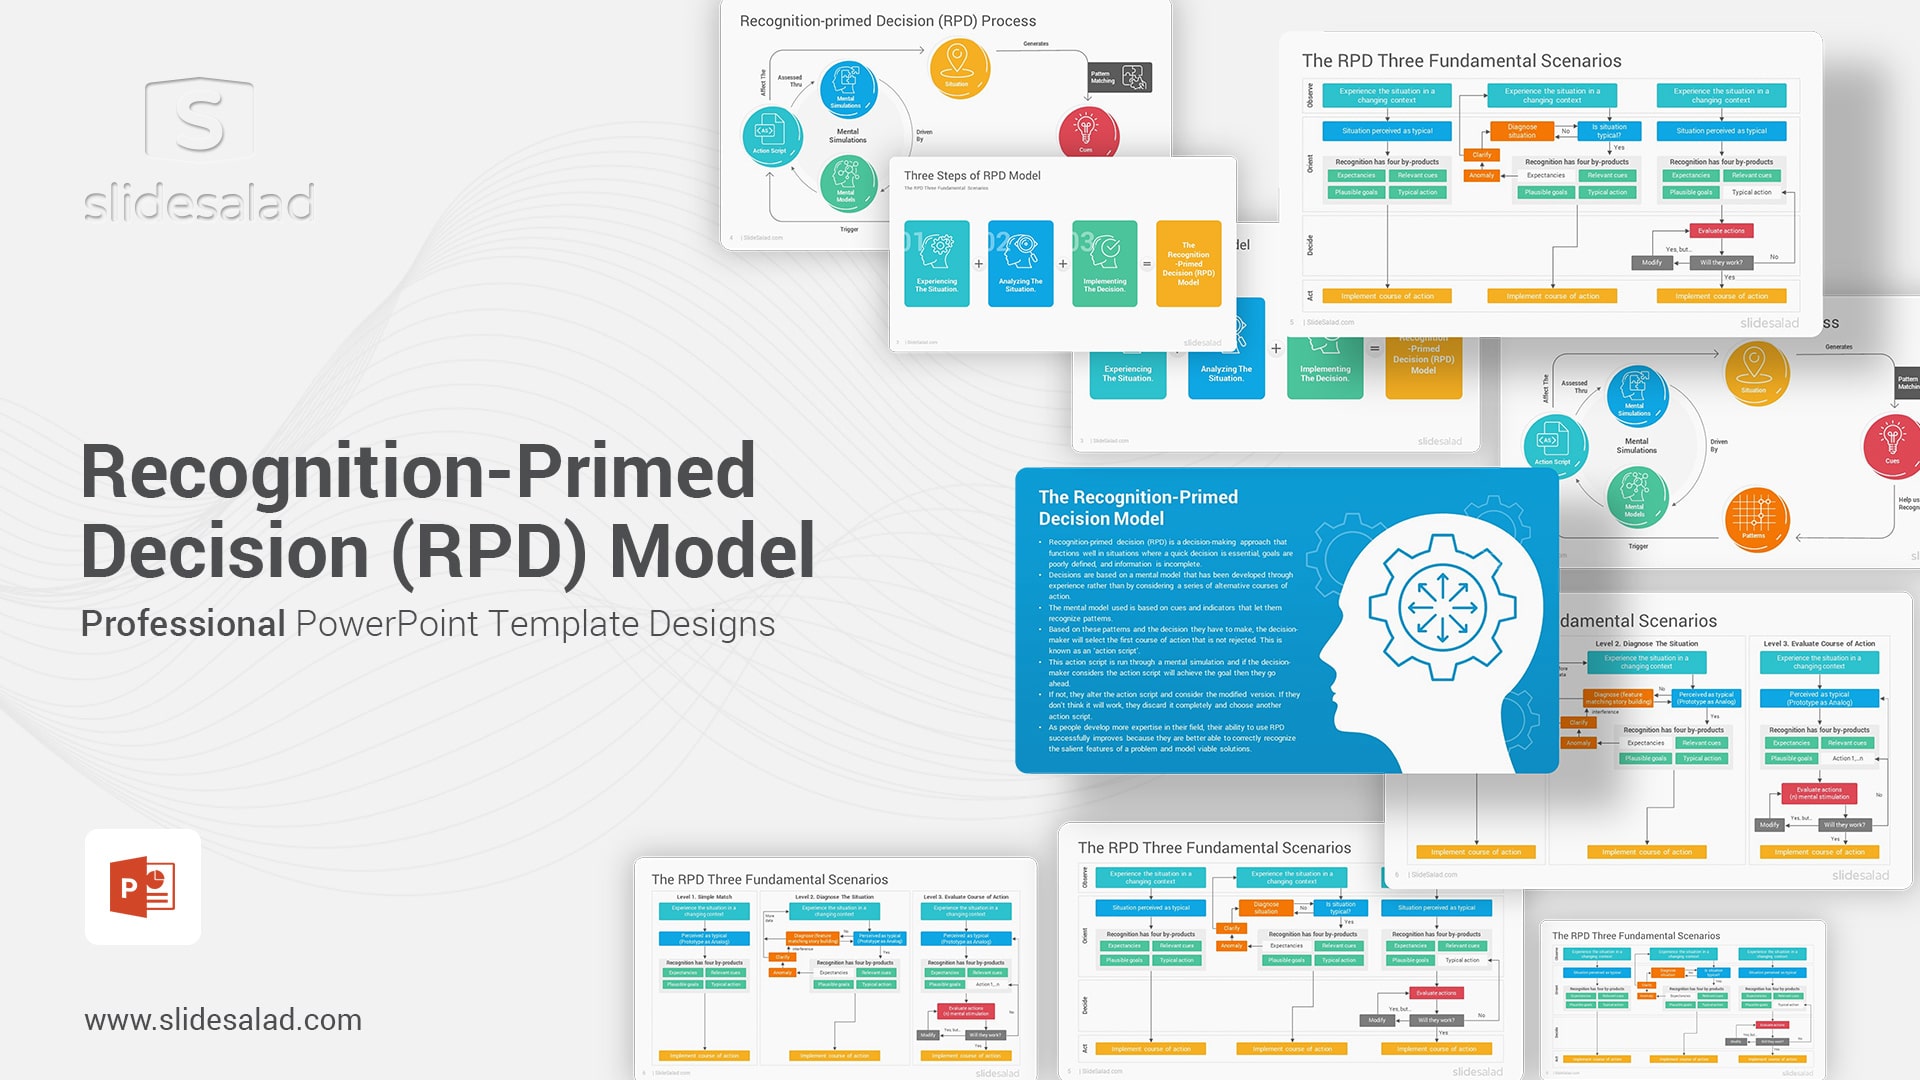 Recognition-Primed Decision Model PowerPoint Template - Showcase Your Team using Corporate Microsoft PowerPoint How People Make Quick Decisions During Complex Situations